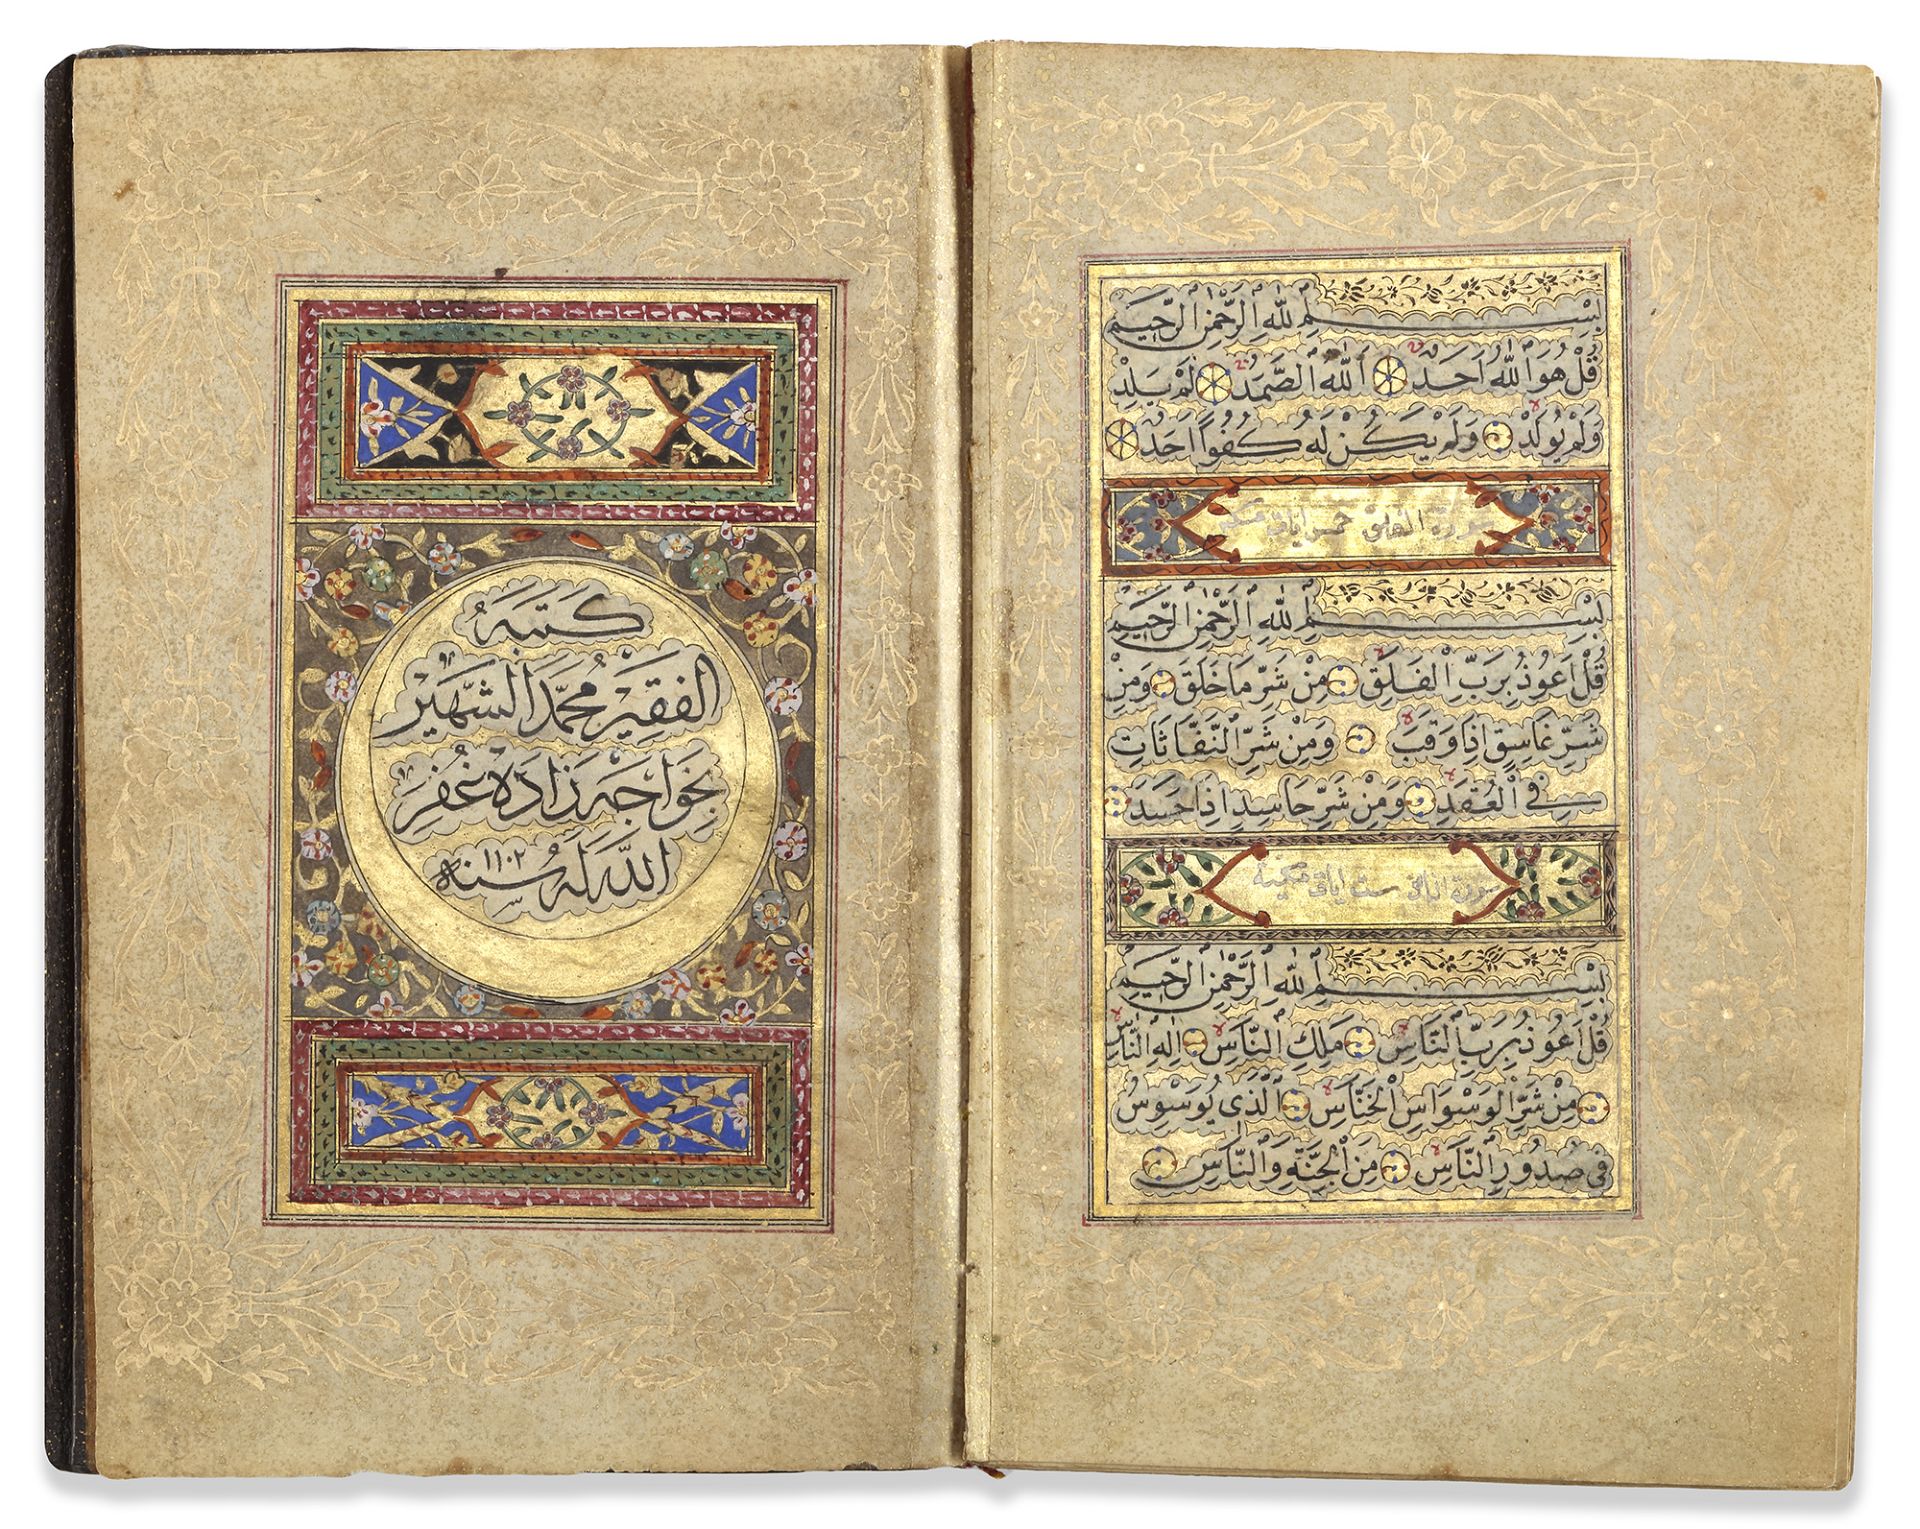 AN OTTOMAN QURAN SIGNED HOCAZADE MEHMED ENVERI, OTTOMAN TURKEY, DATED 1102 AH/1690 AD - Image 2 of 6